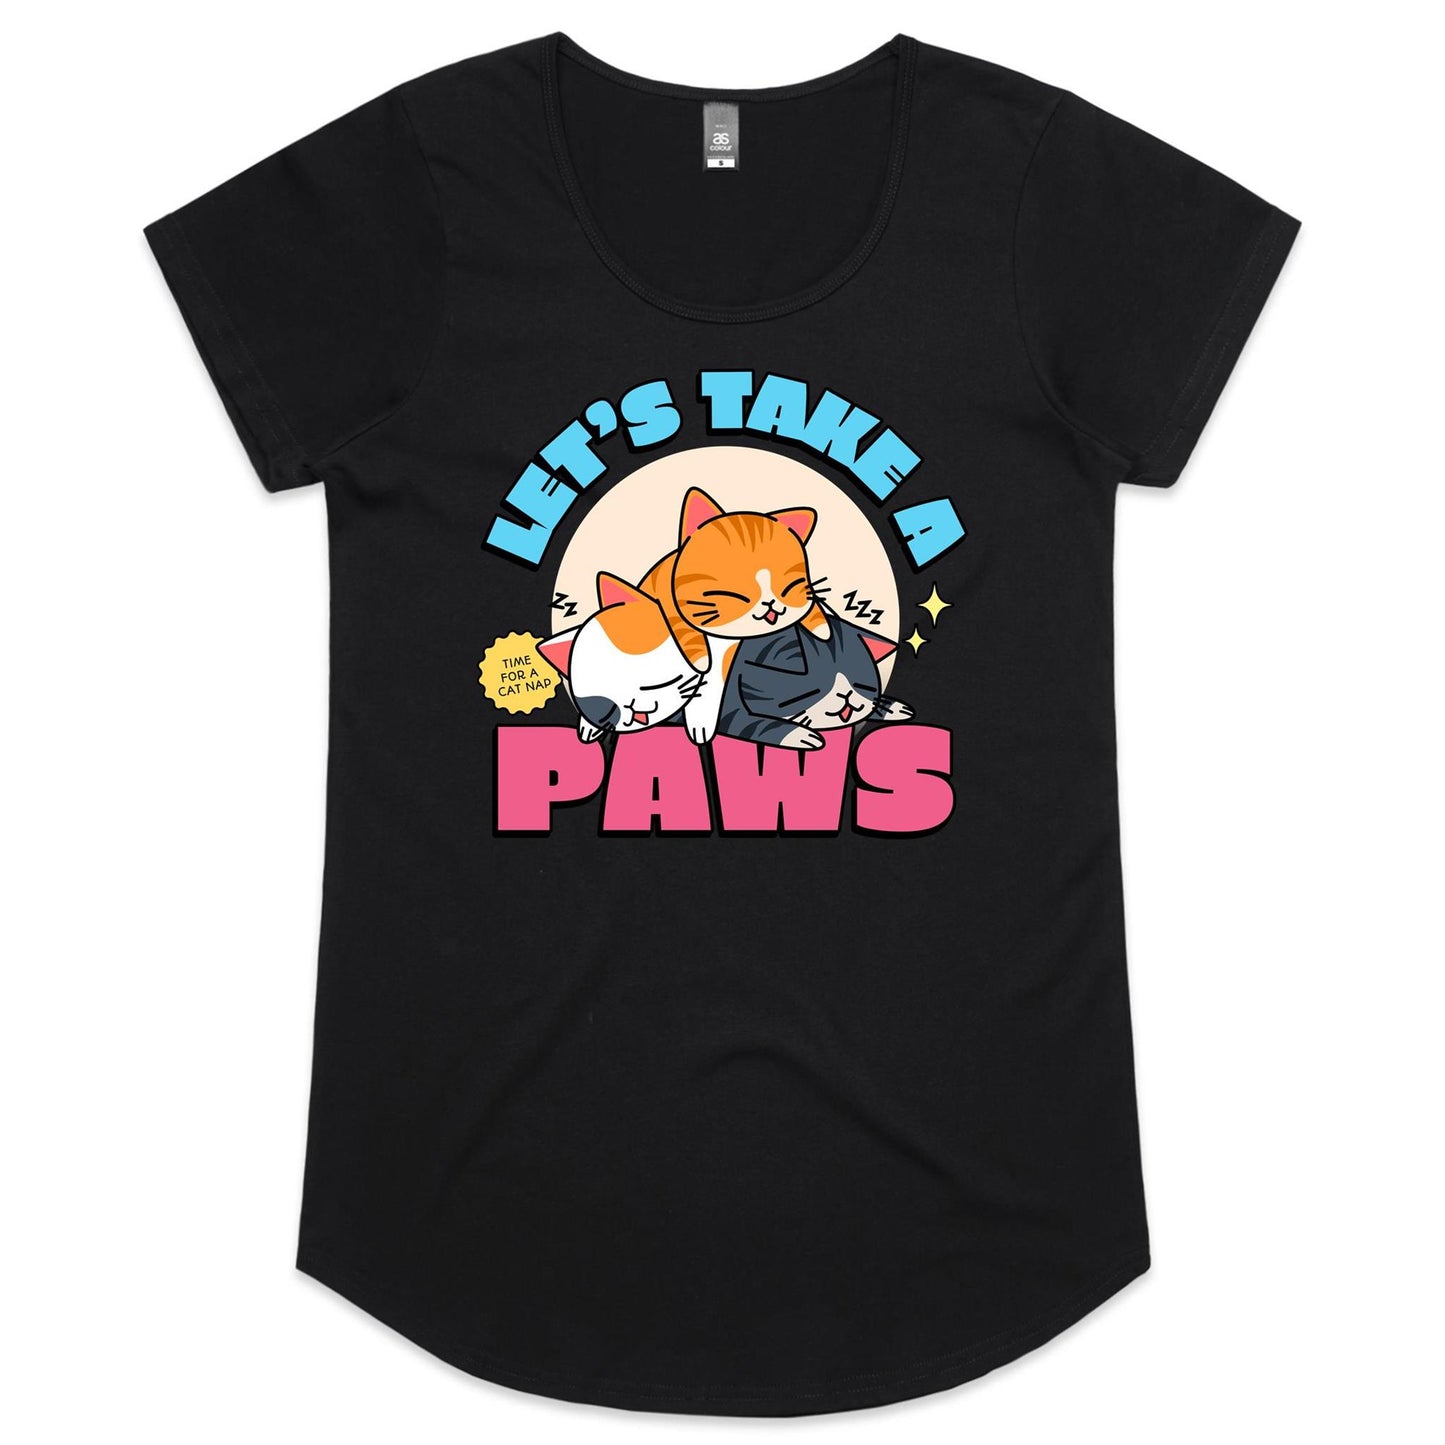 Let's Take A Paws, Time For A Cat Nap - Womens Scoop Neck T-Shirt Black Womens Scoop Neck T-shirt animal